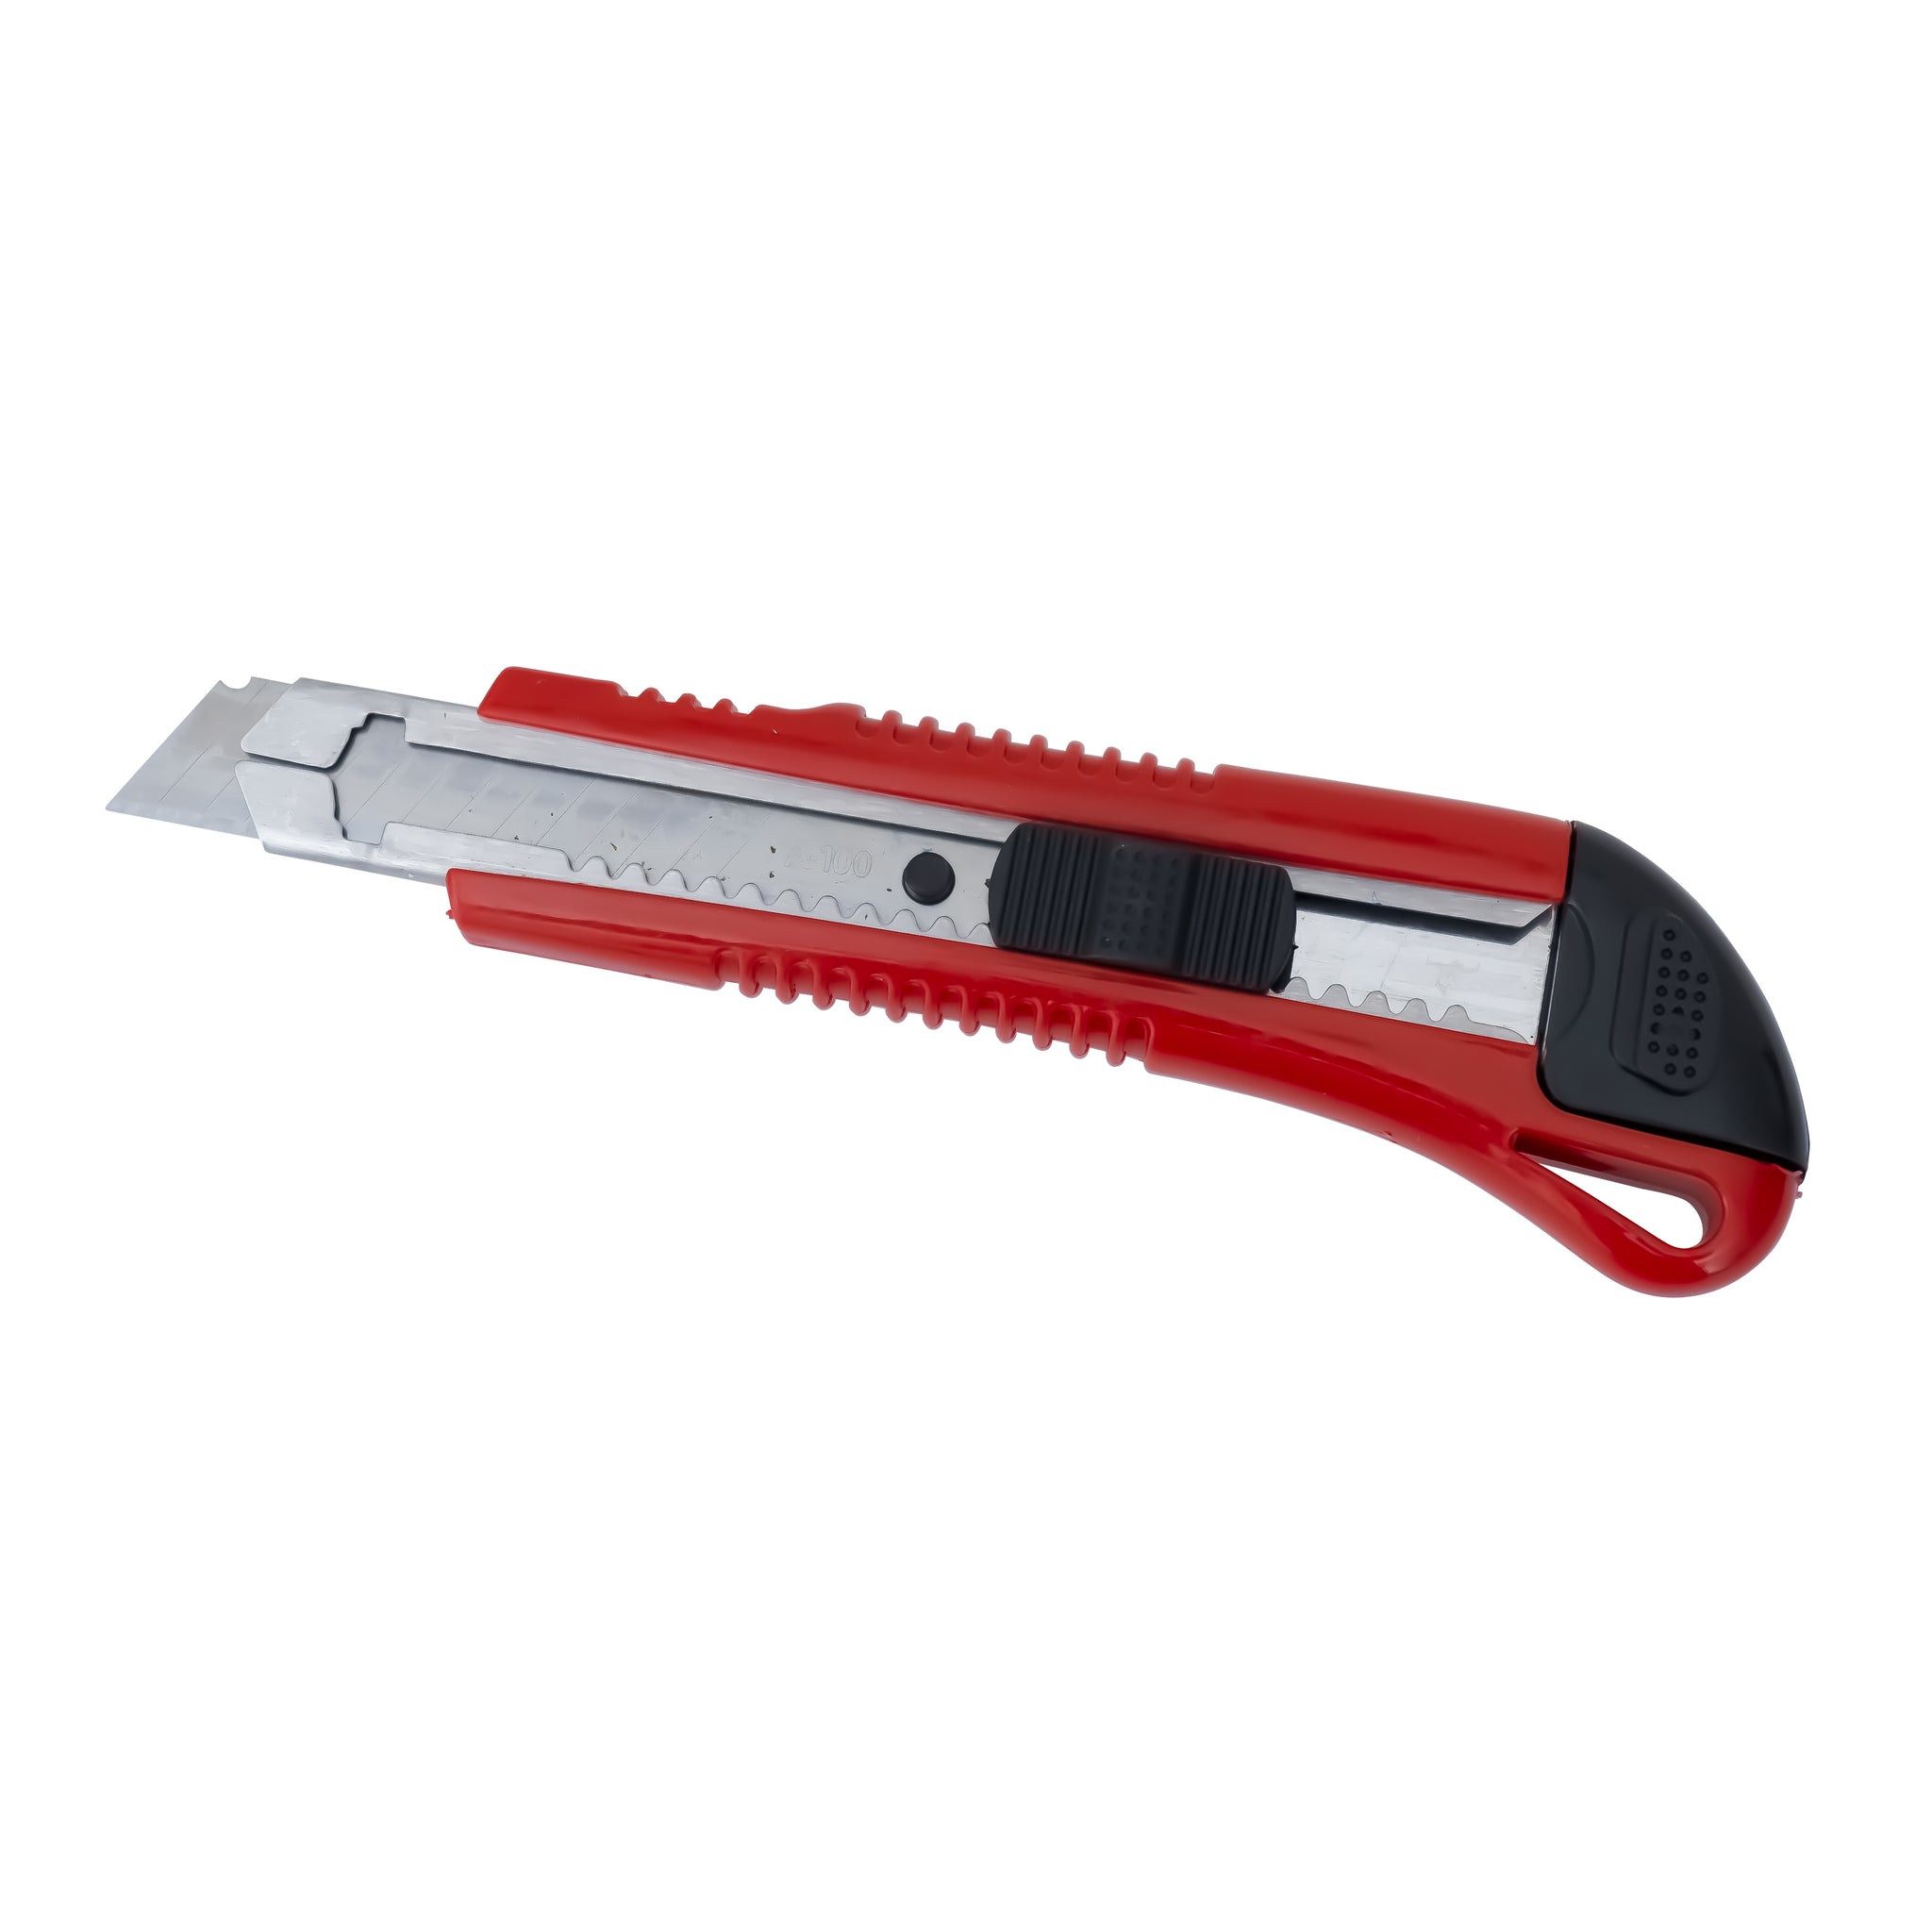 Excel Blades Heavy Duty Plastic Retractable Box Cutter, 18MM Snap Knife,  Red 6pk. 16850